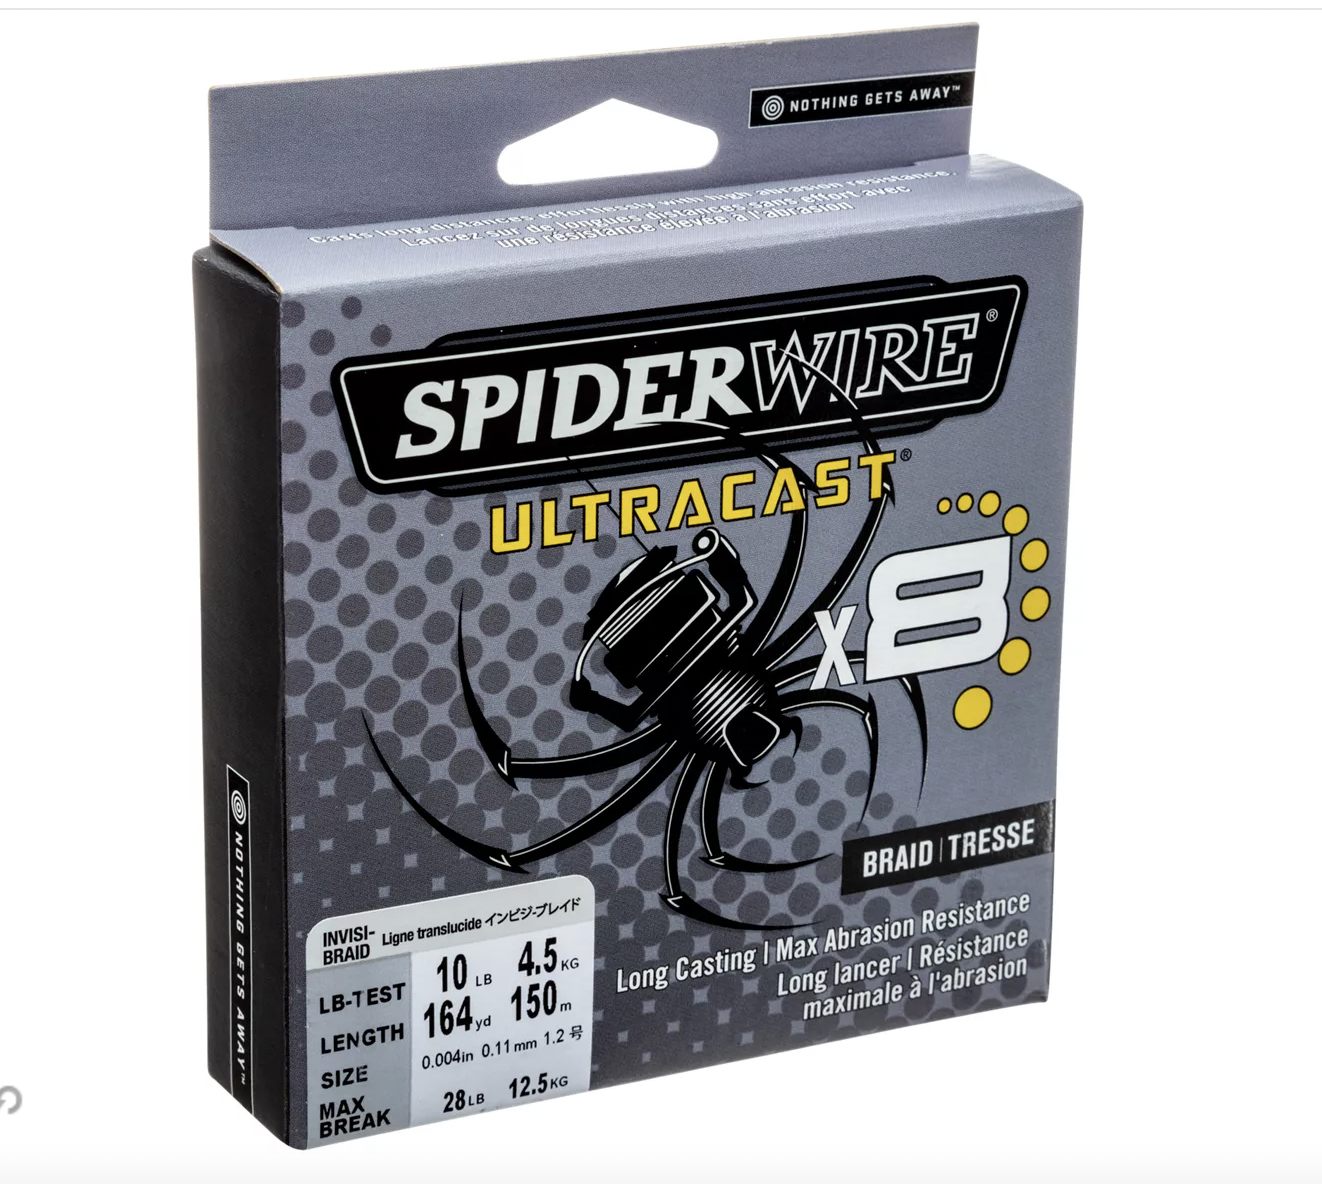 SpiderWire UltraCast is the best braided fishing line.